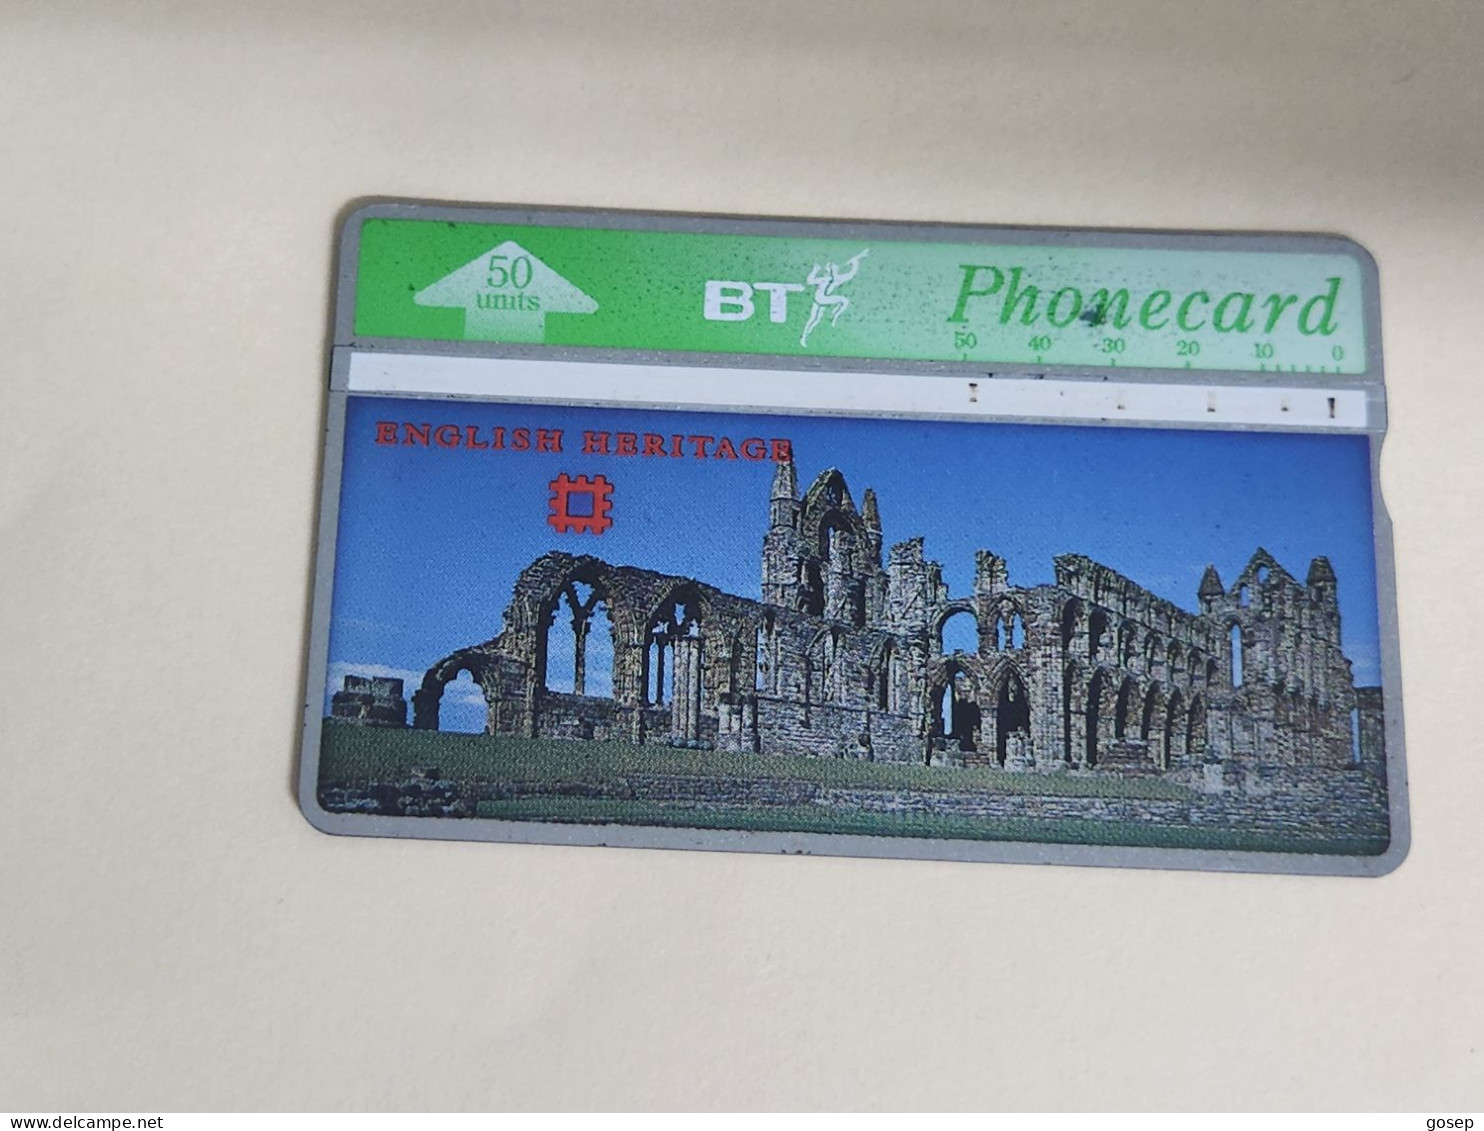 United Kingdom-(BTA112)-HERITAGE-Whitby Abbey-(191)(50units)(527K64400)price Cataloge3.00£-used+1card Prepiad Free - BT Emissions Publicitaires